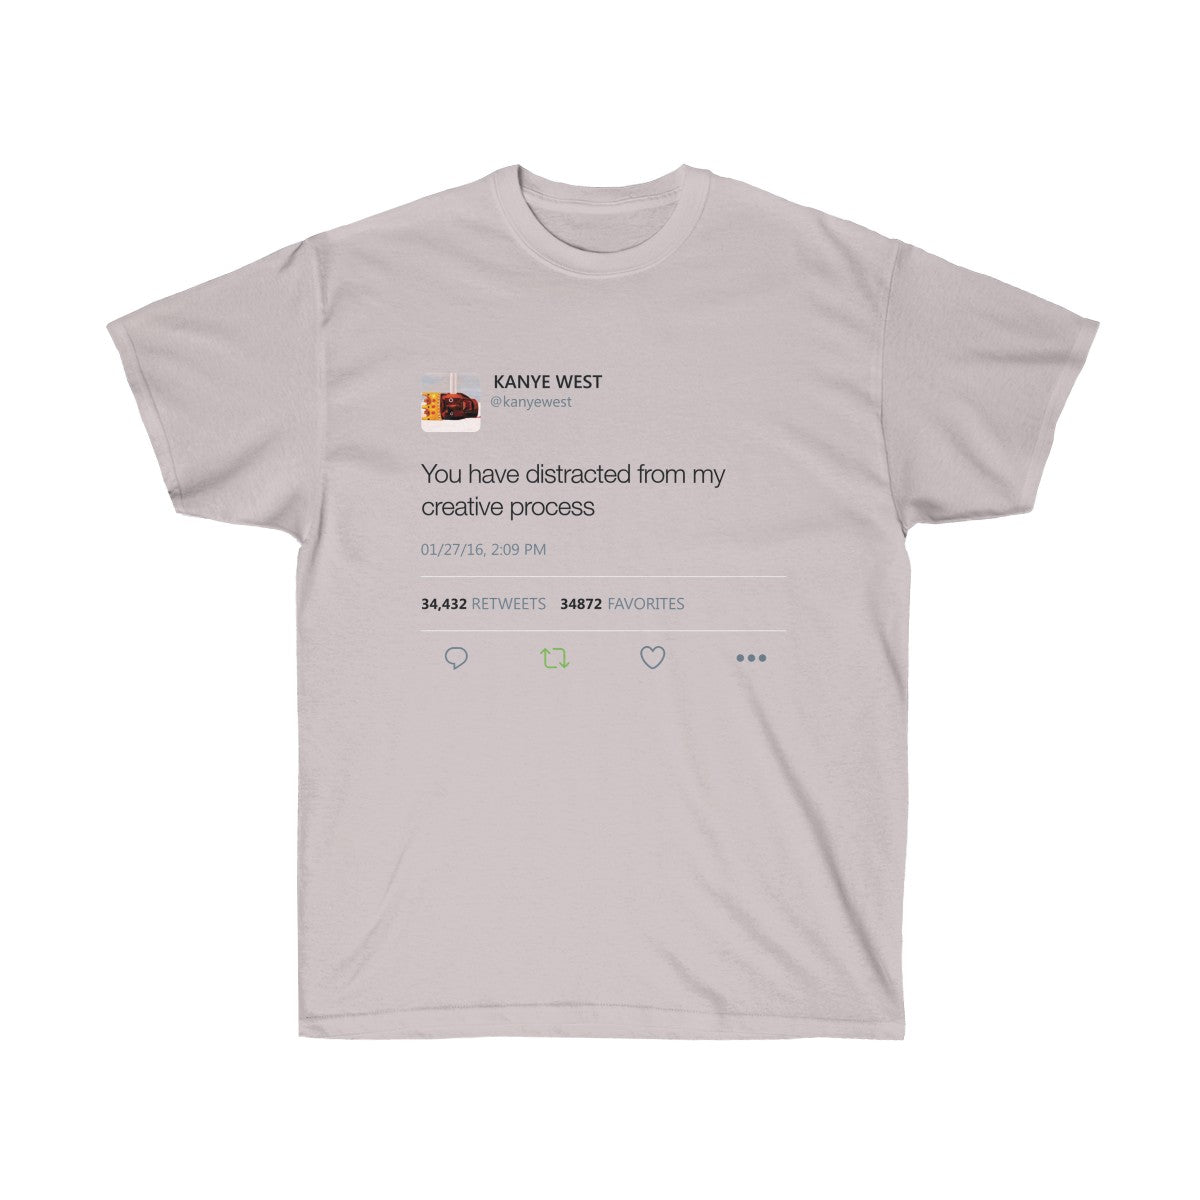 You have distracted from my creative process - Kanye West Tweet T-Shirt-Ice Grey-S-Archethype